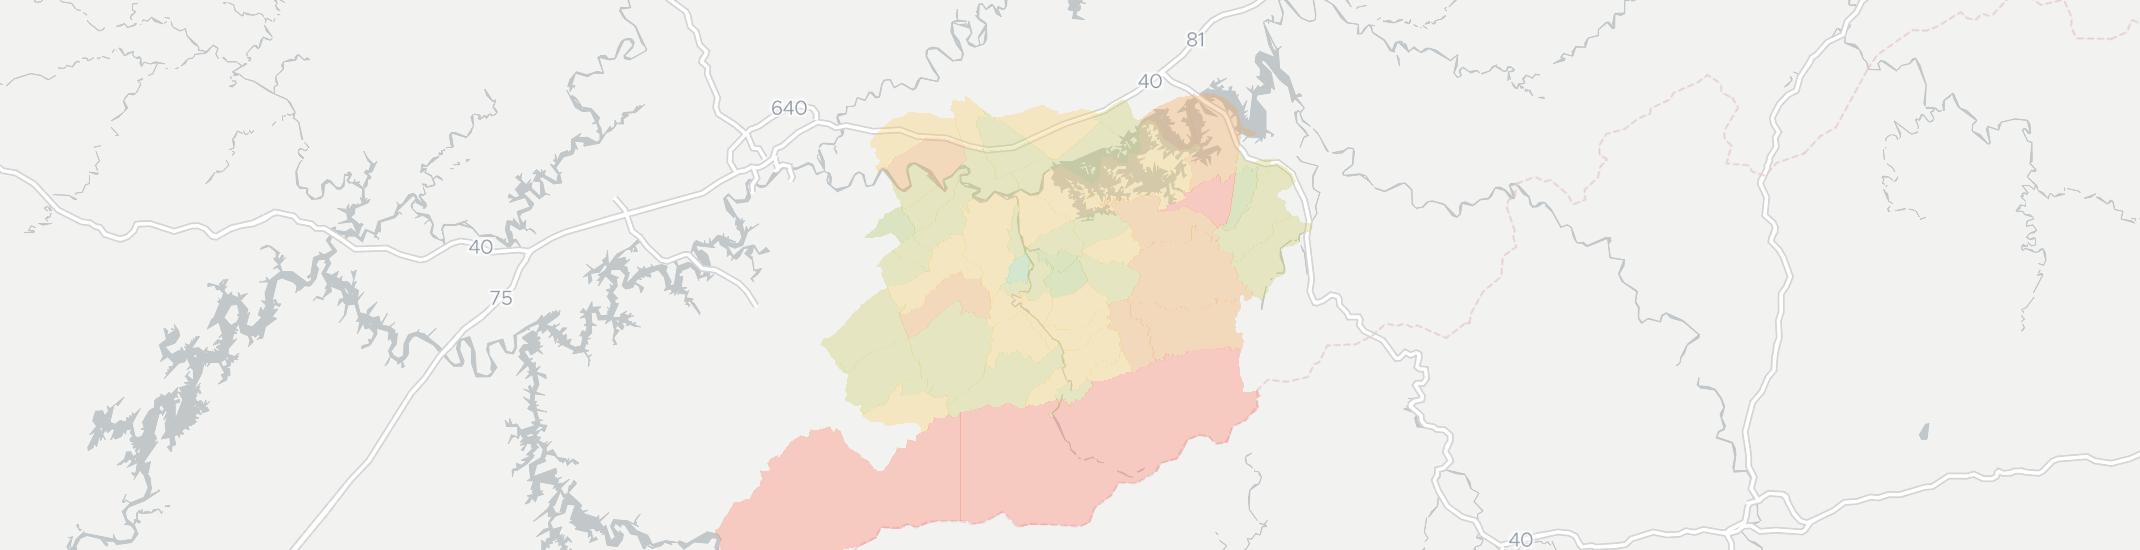 Sevierville Internet Competition Map. Click for interactive map.